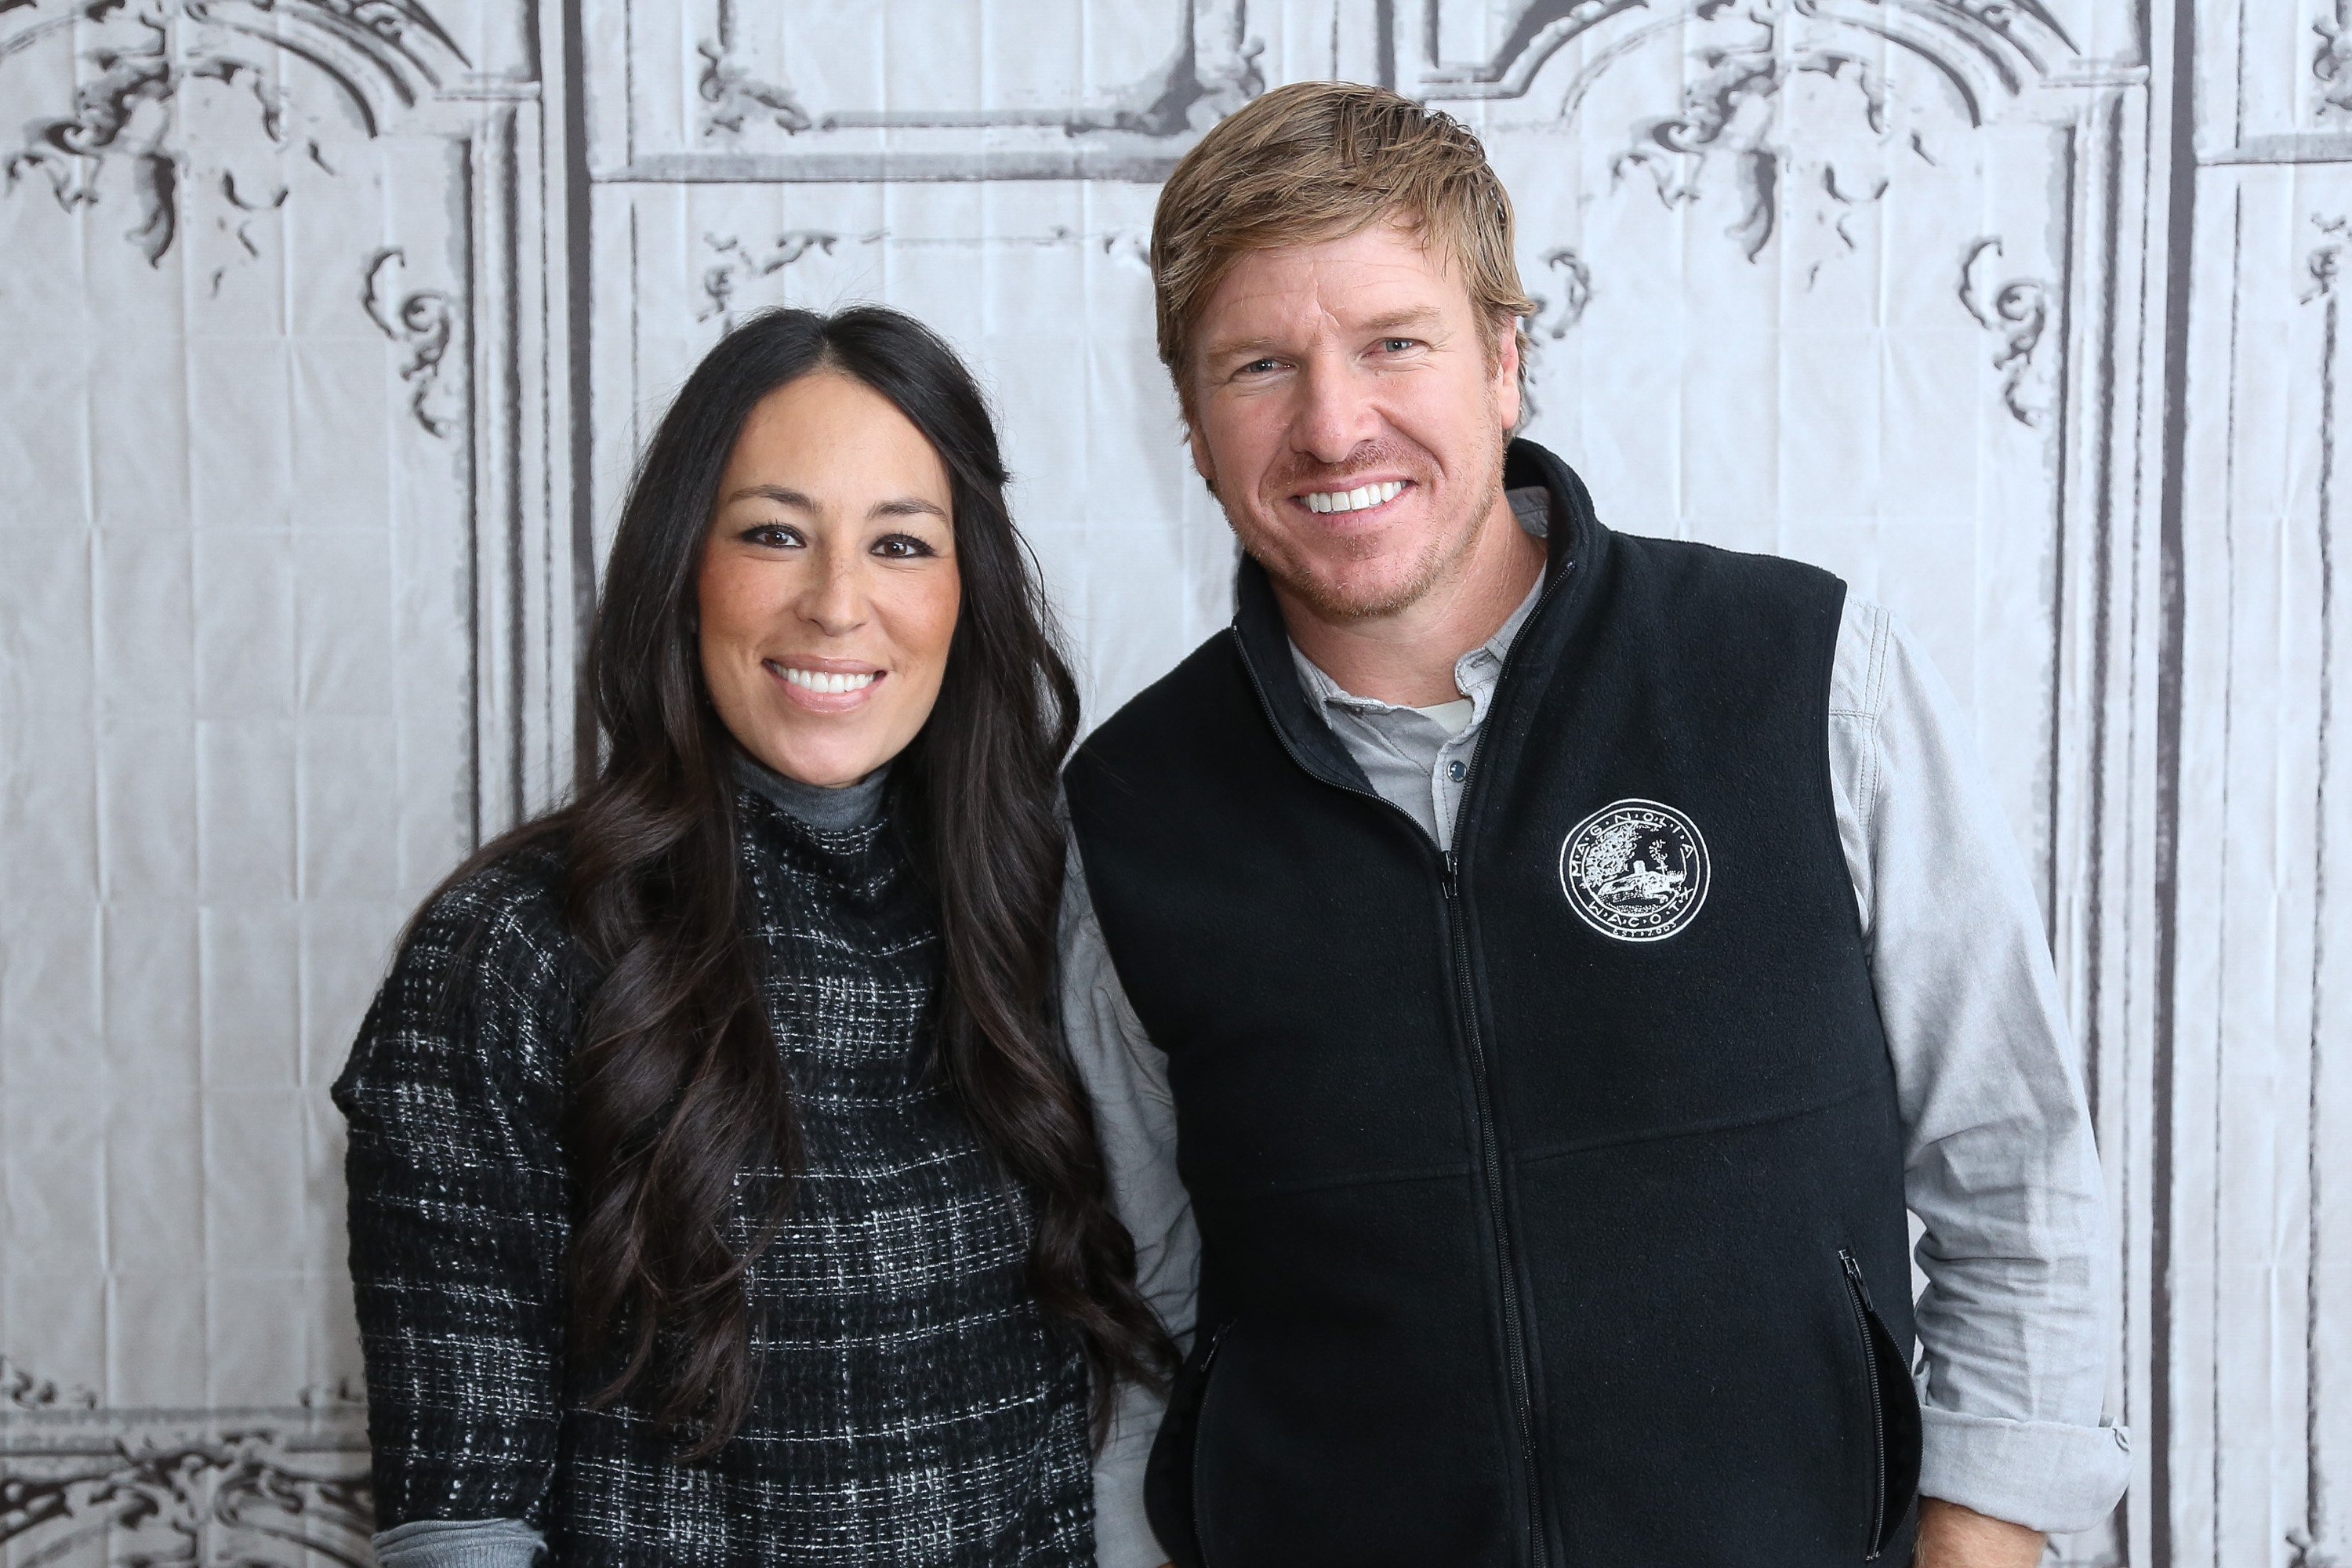 Chip and Joanna Gaines attend AOL Build Presents: "Fixer Upper" at AOL Studios In New York on December 8, 2015. | Photo: Getty Images